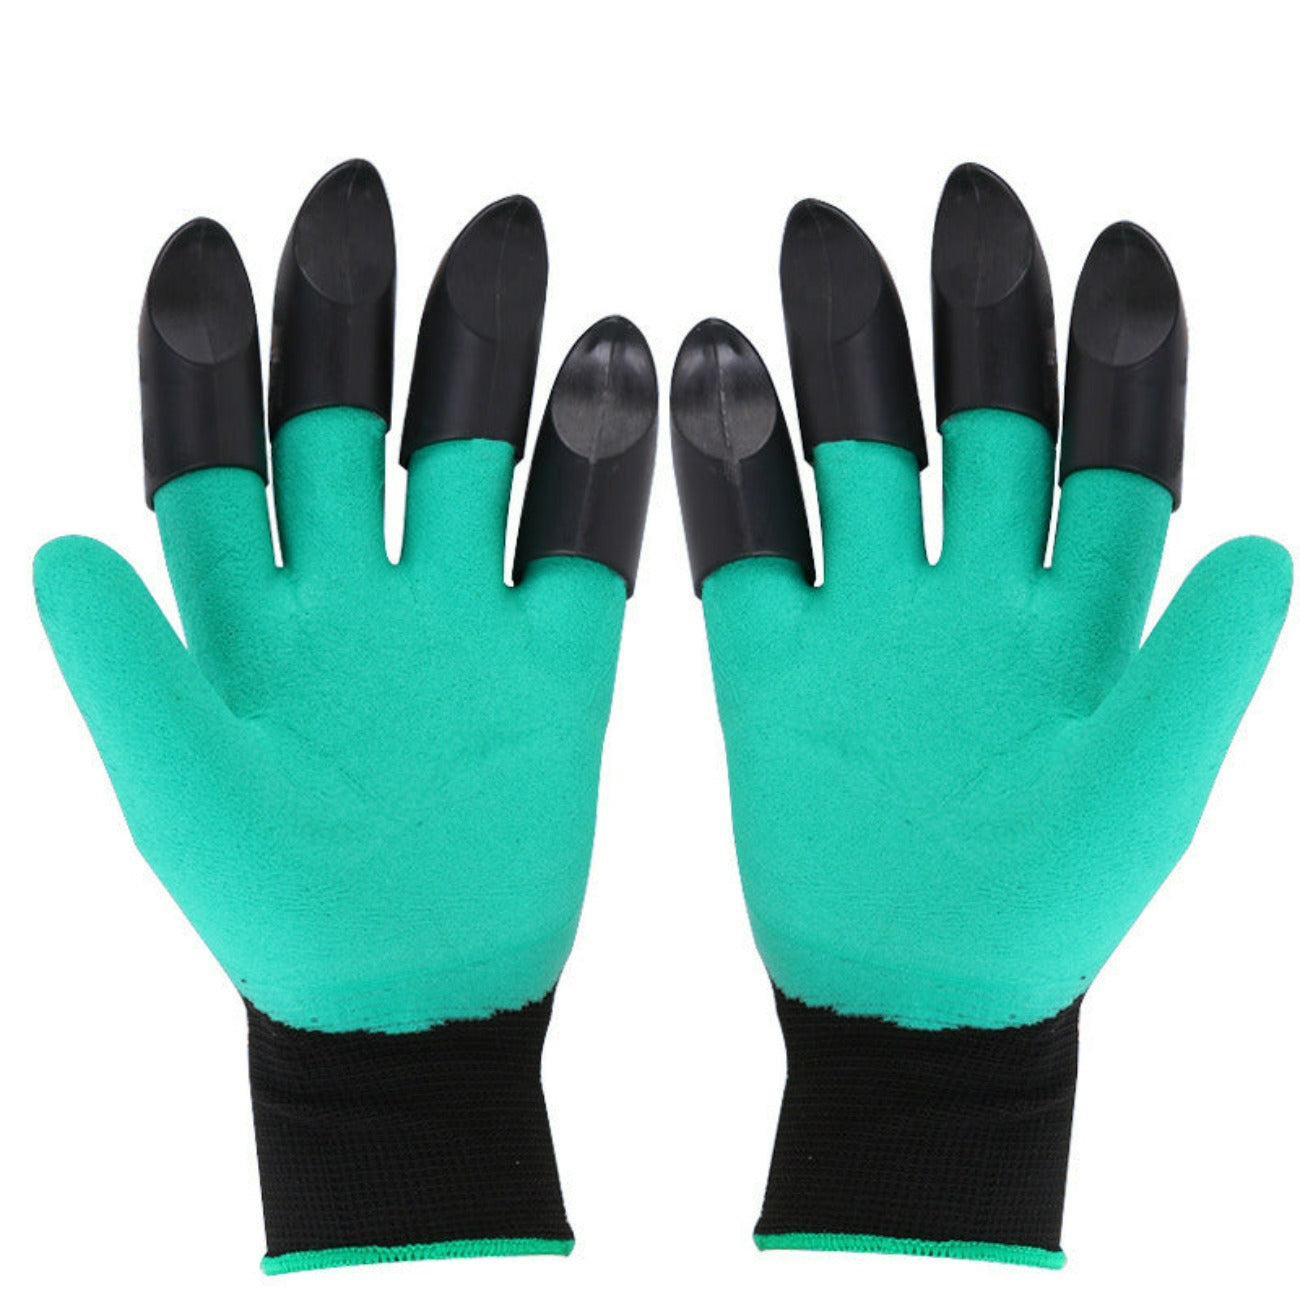 Pair of Garden Gloves with Claws 